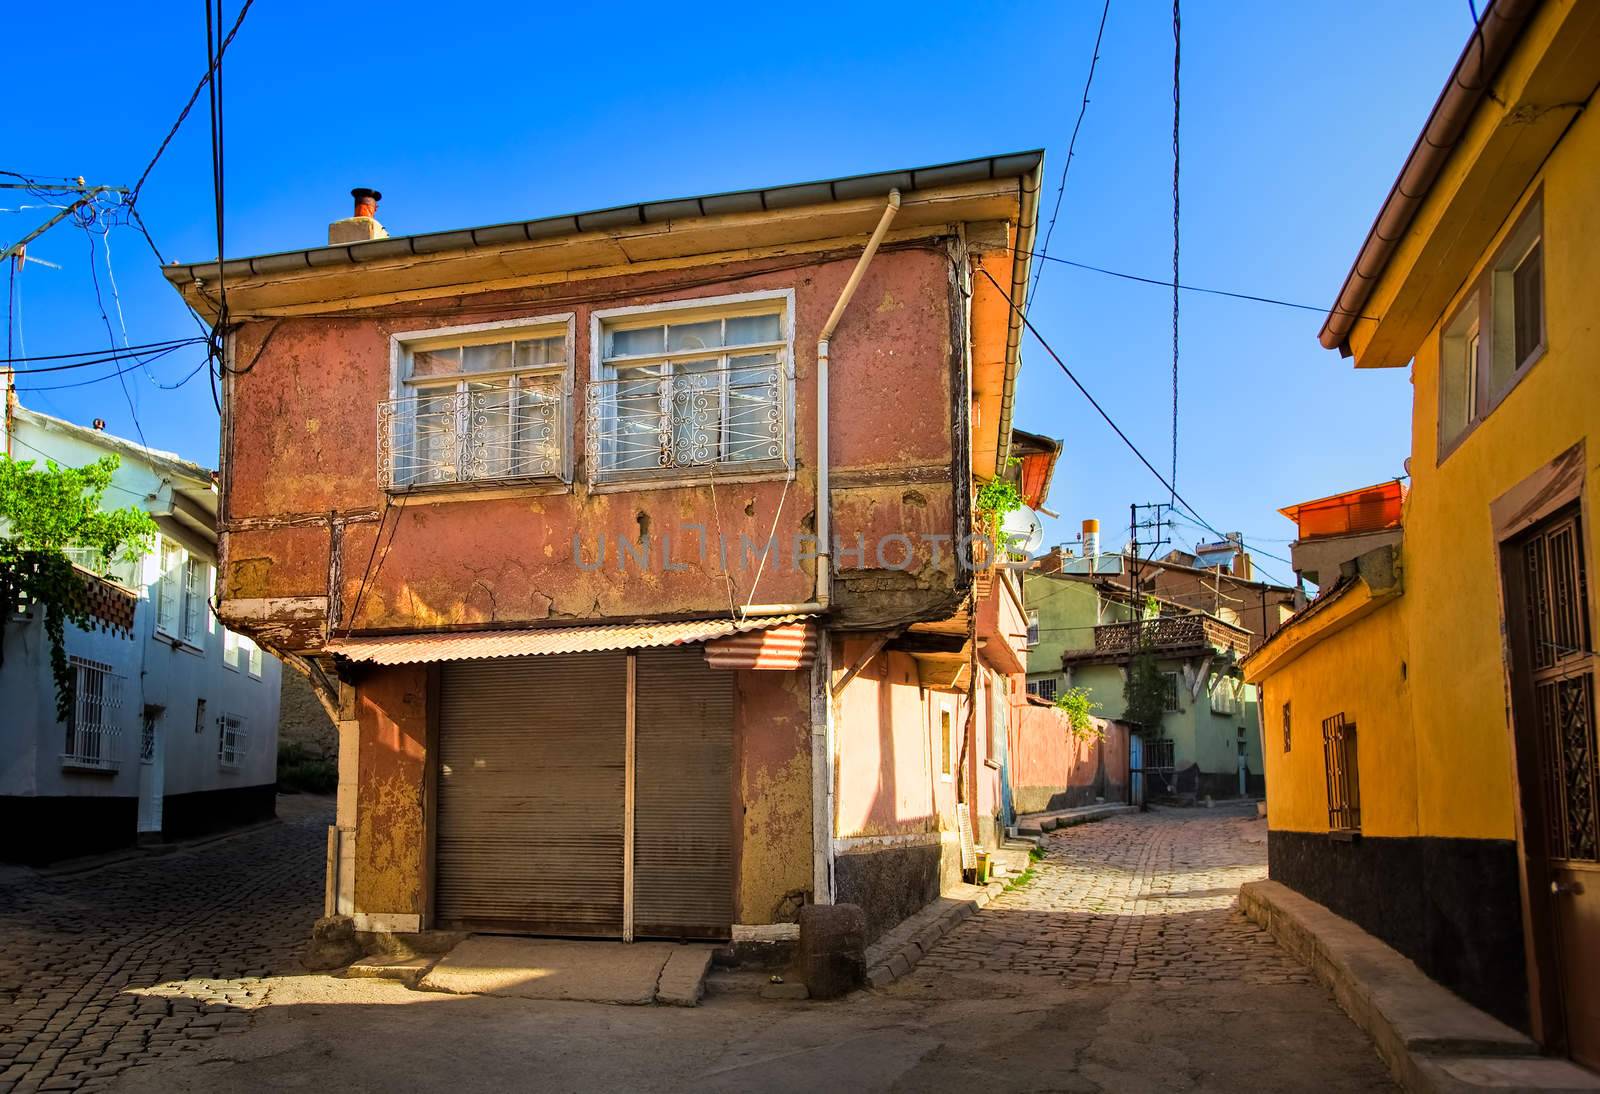 Old traditional ottoman house in Afyon, Turkey by GlobePhotos